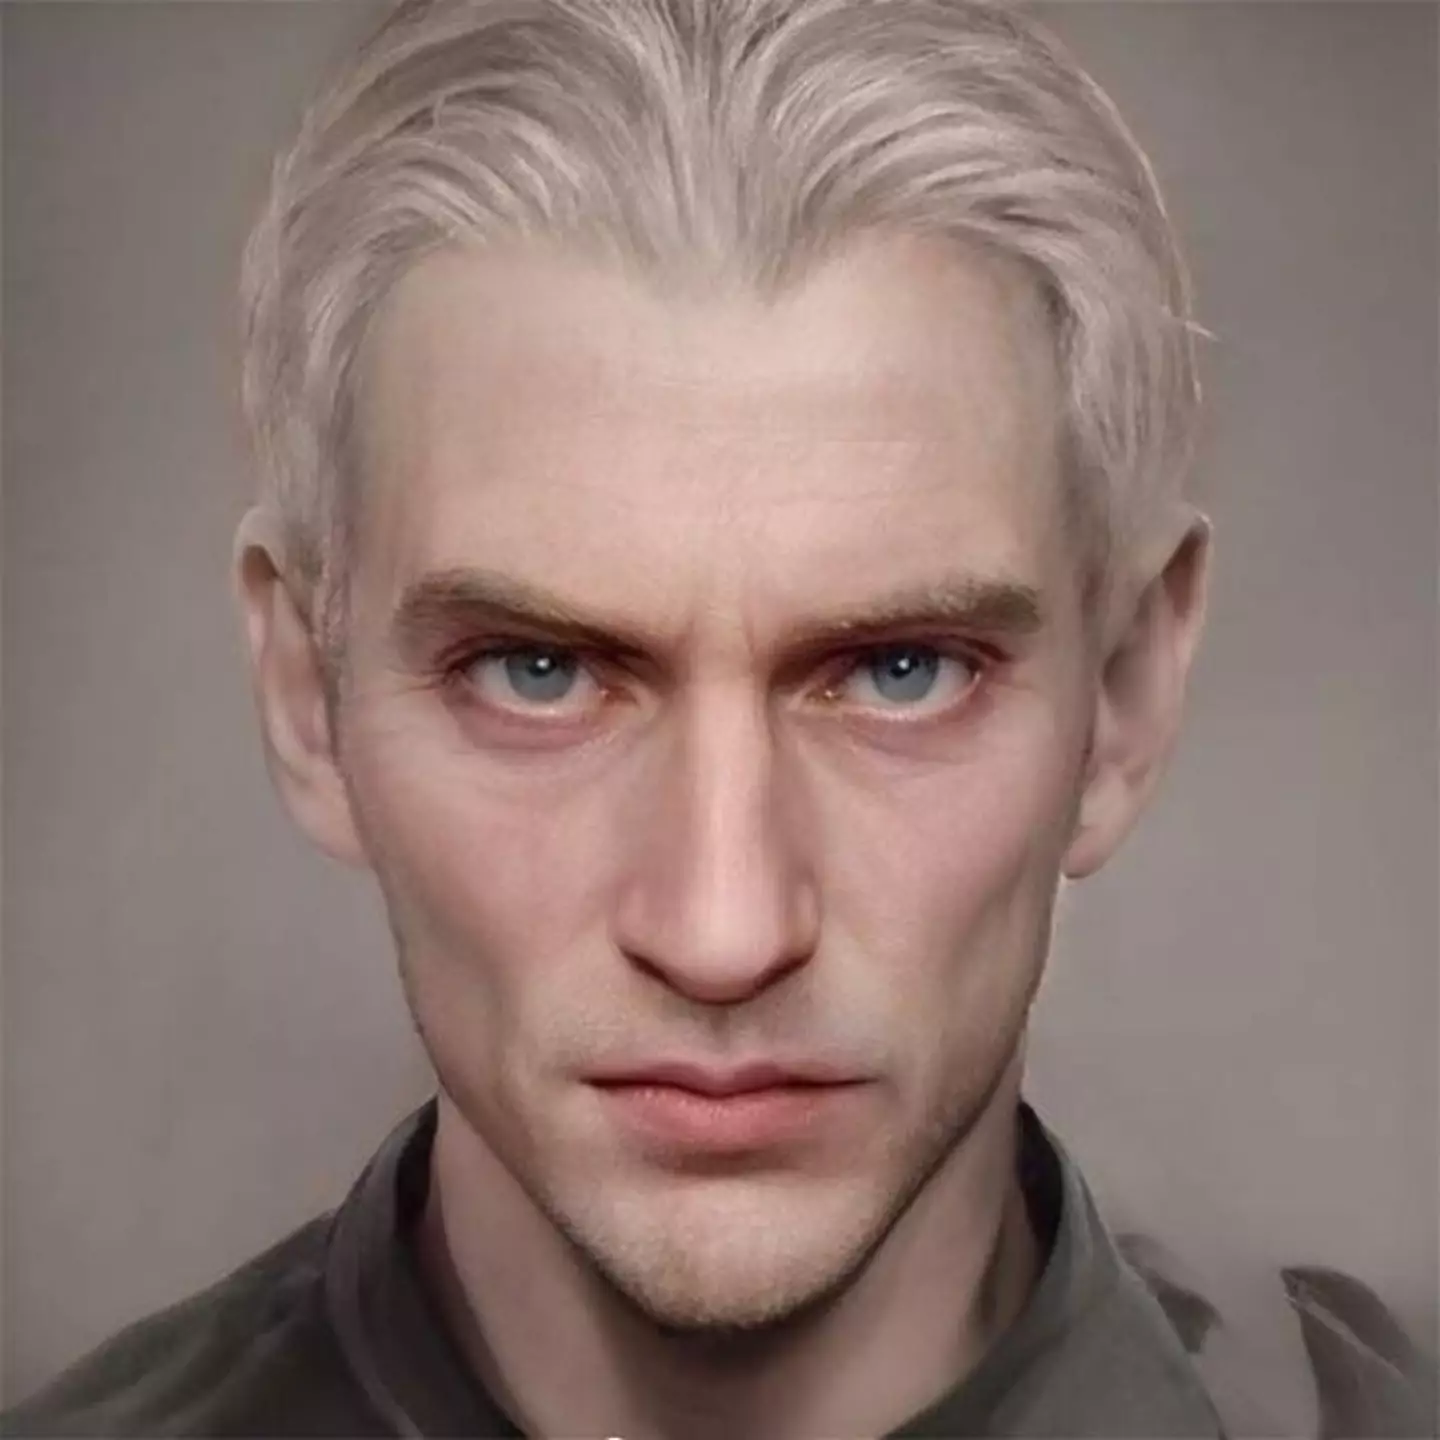 His father Lucius was also adapted using AI.